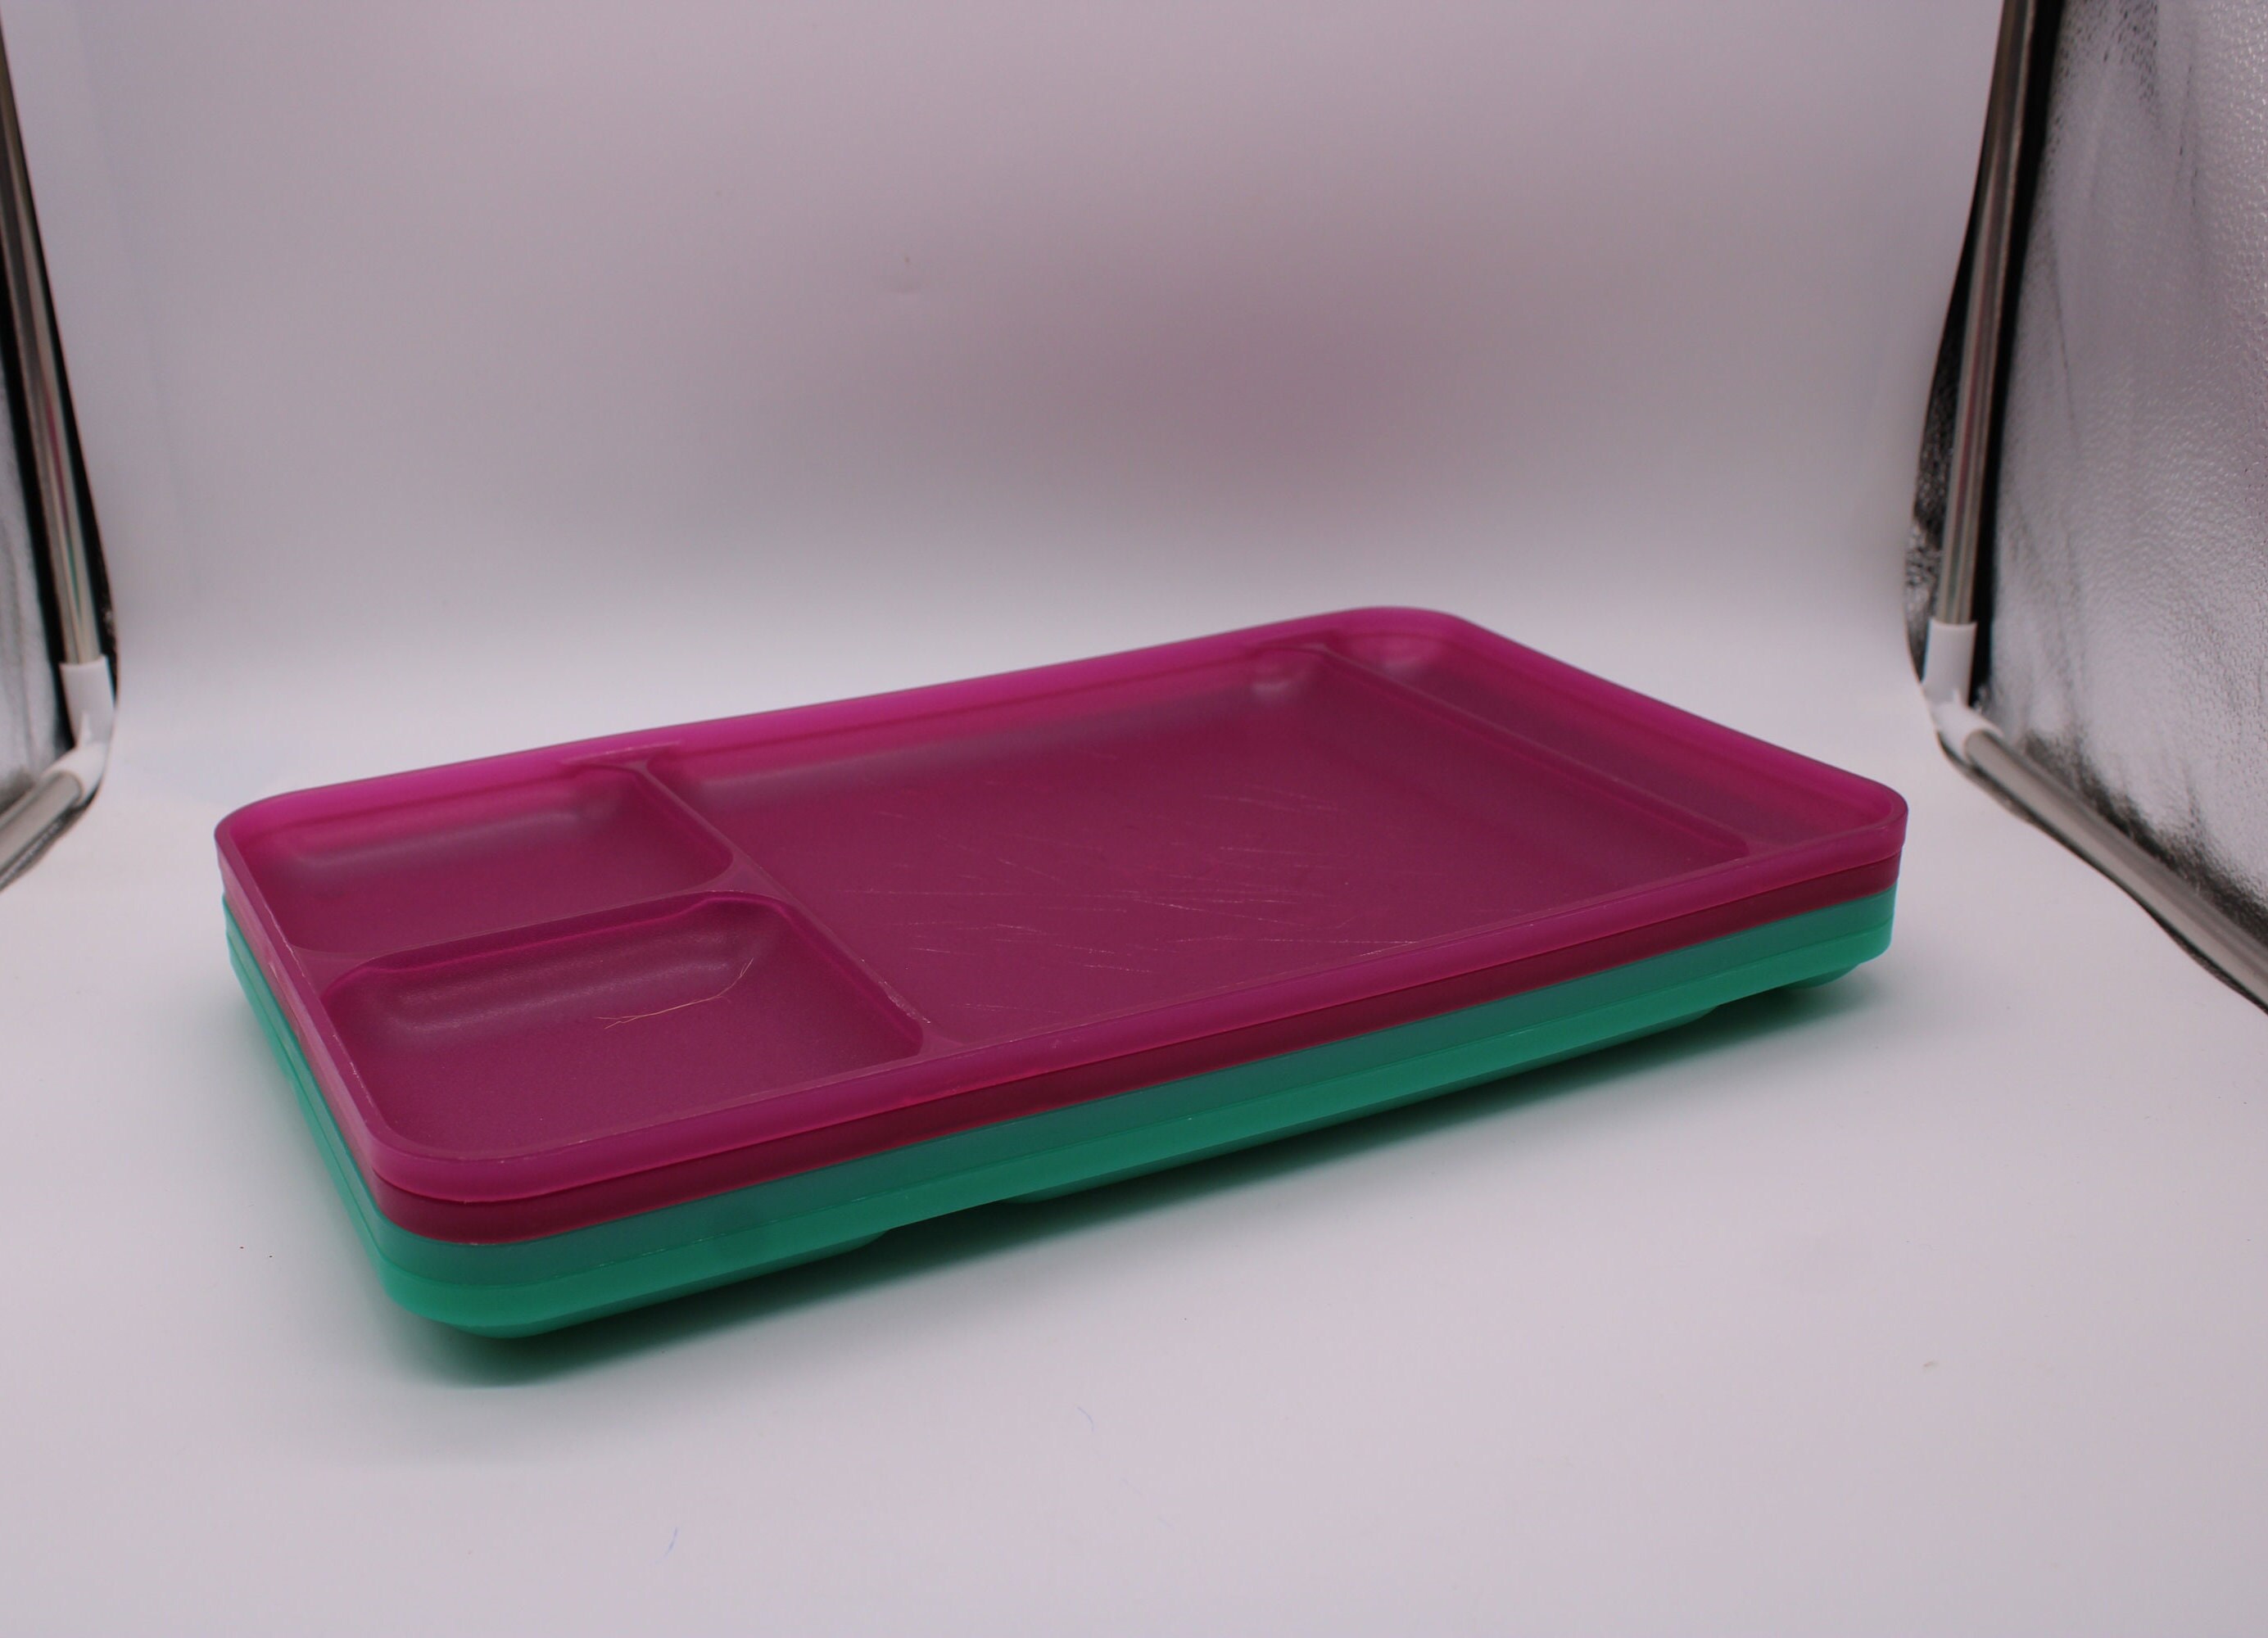 Tupperware Basic Bright Mini Rectangular 1 cup Snack Container Purple Pink  New